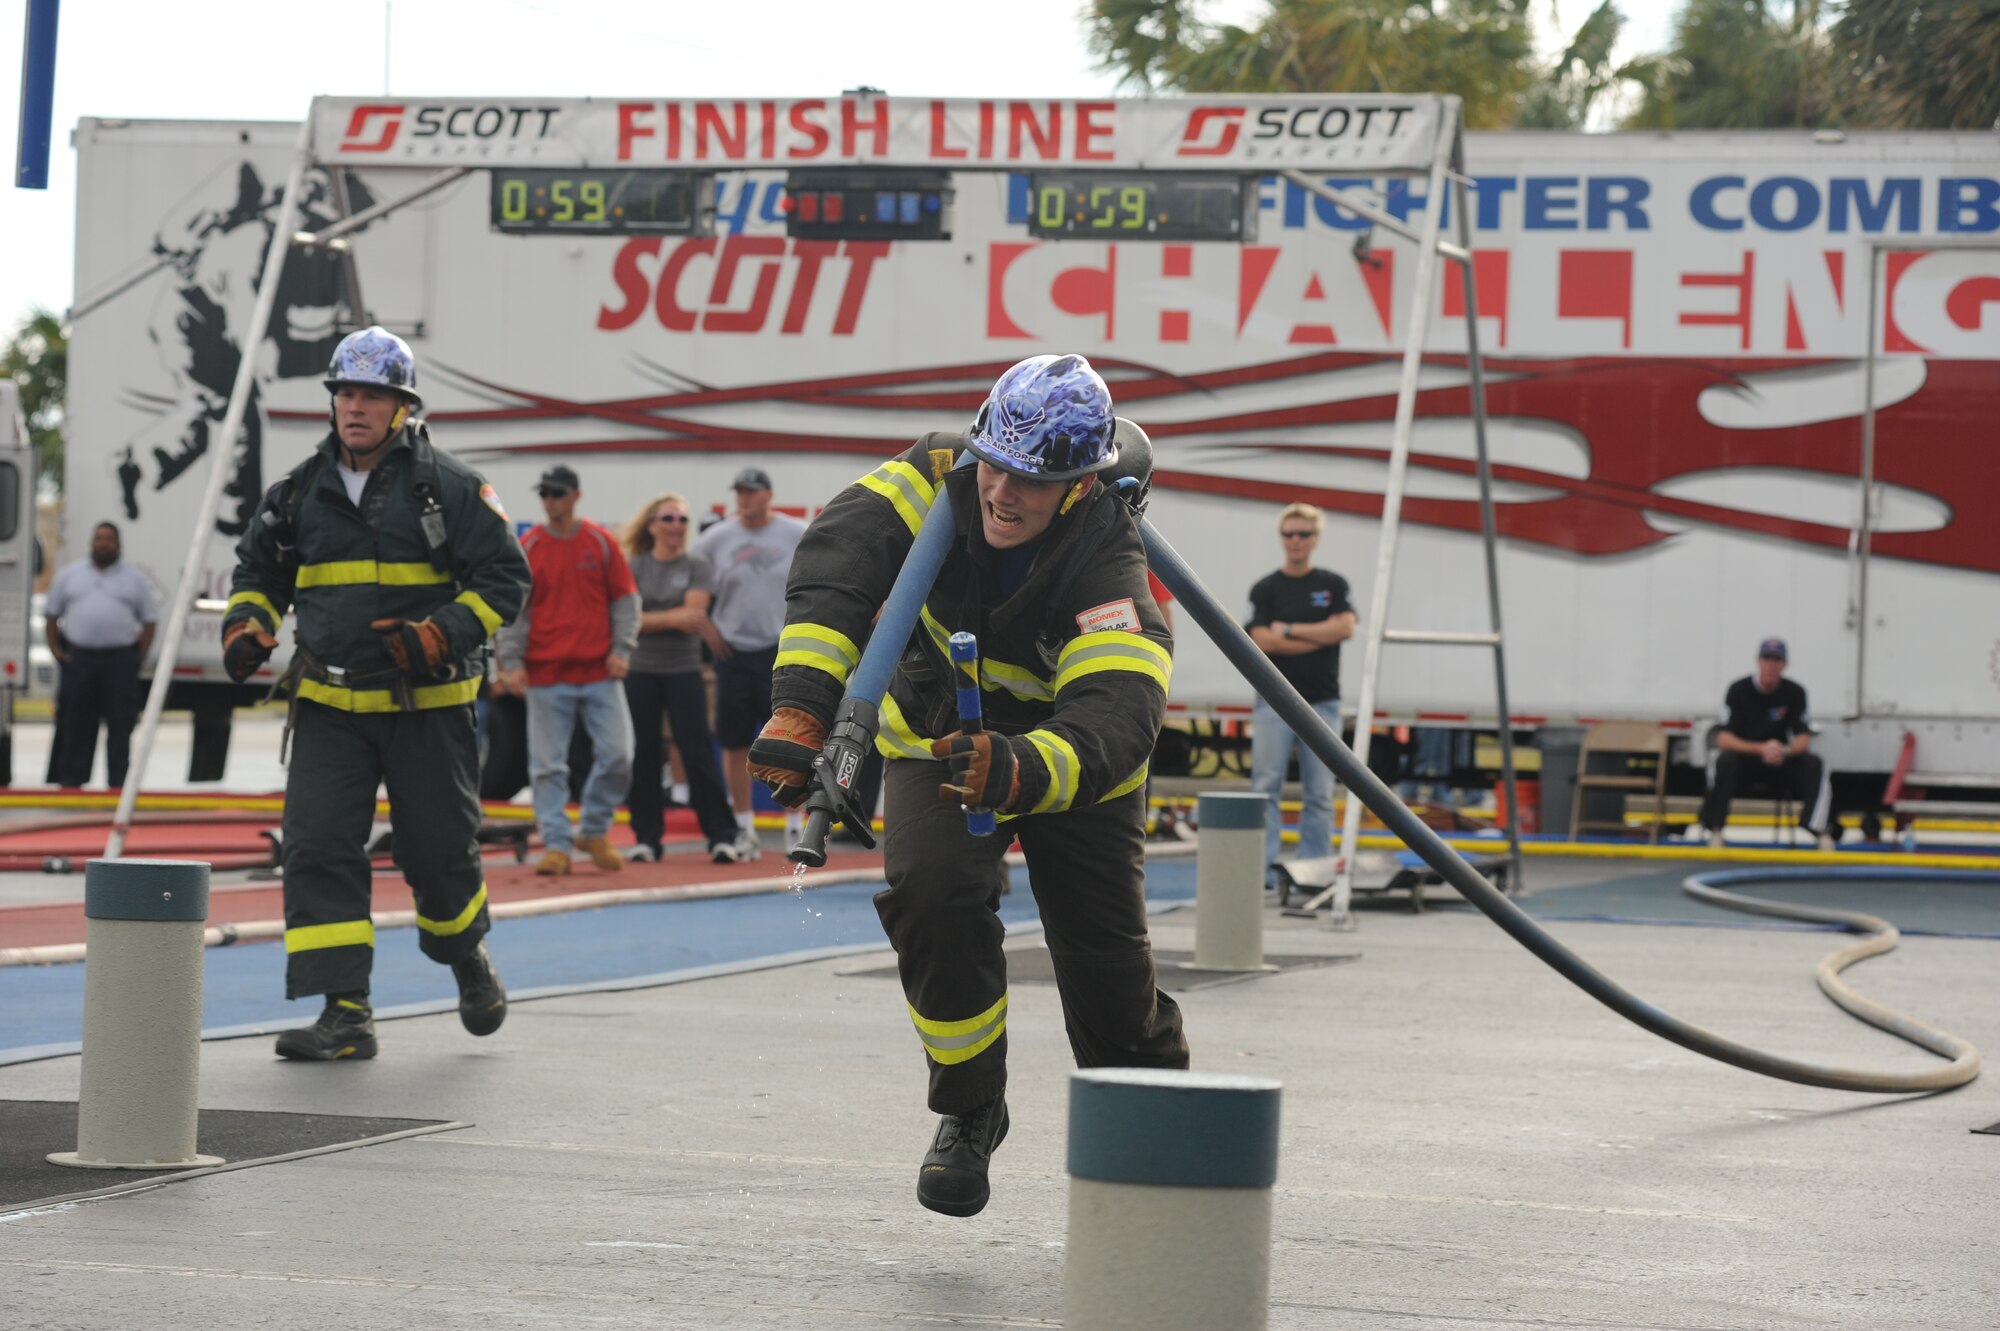 Anthony Beaudry hauls a water-laden firehose to its target Nov. 17, 2011, during the World Firefighter Combat Challenge XX in Myrtle Beach, S.C.  Beaudry and his fellow firefighters from Whiteman Air Force Base, Mo., came in second in the world among men's relay teams. (U.S. Air Force photo/John Van Winkle)